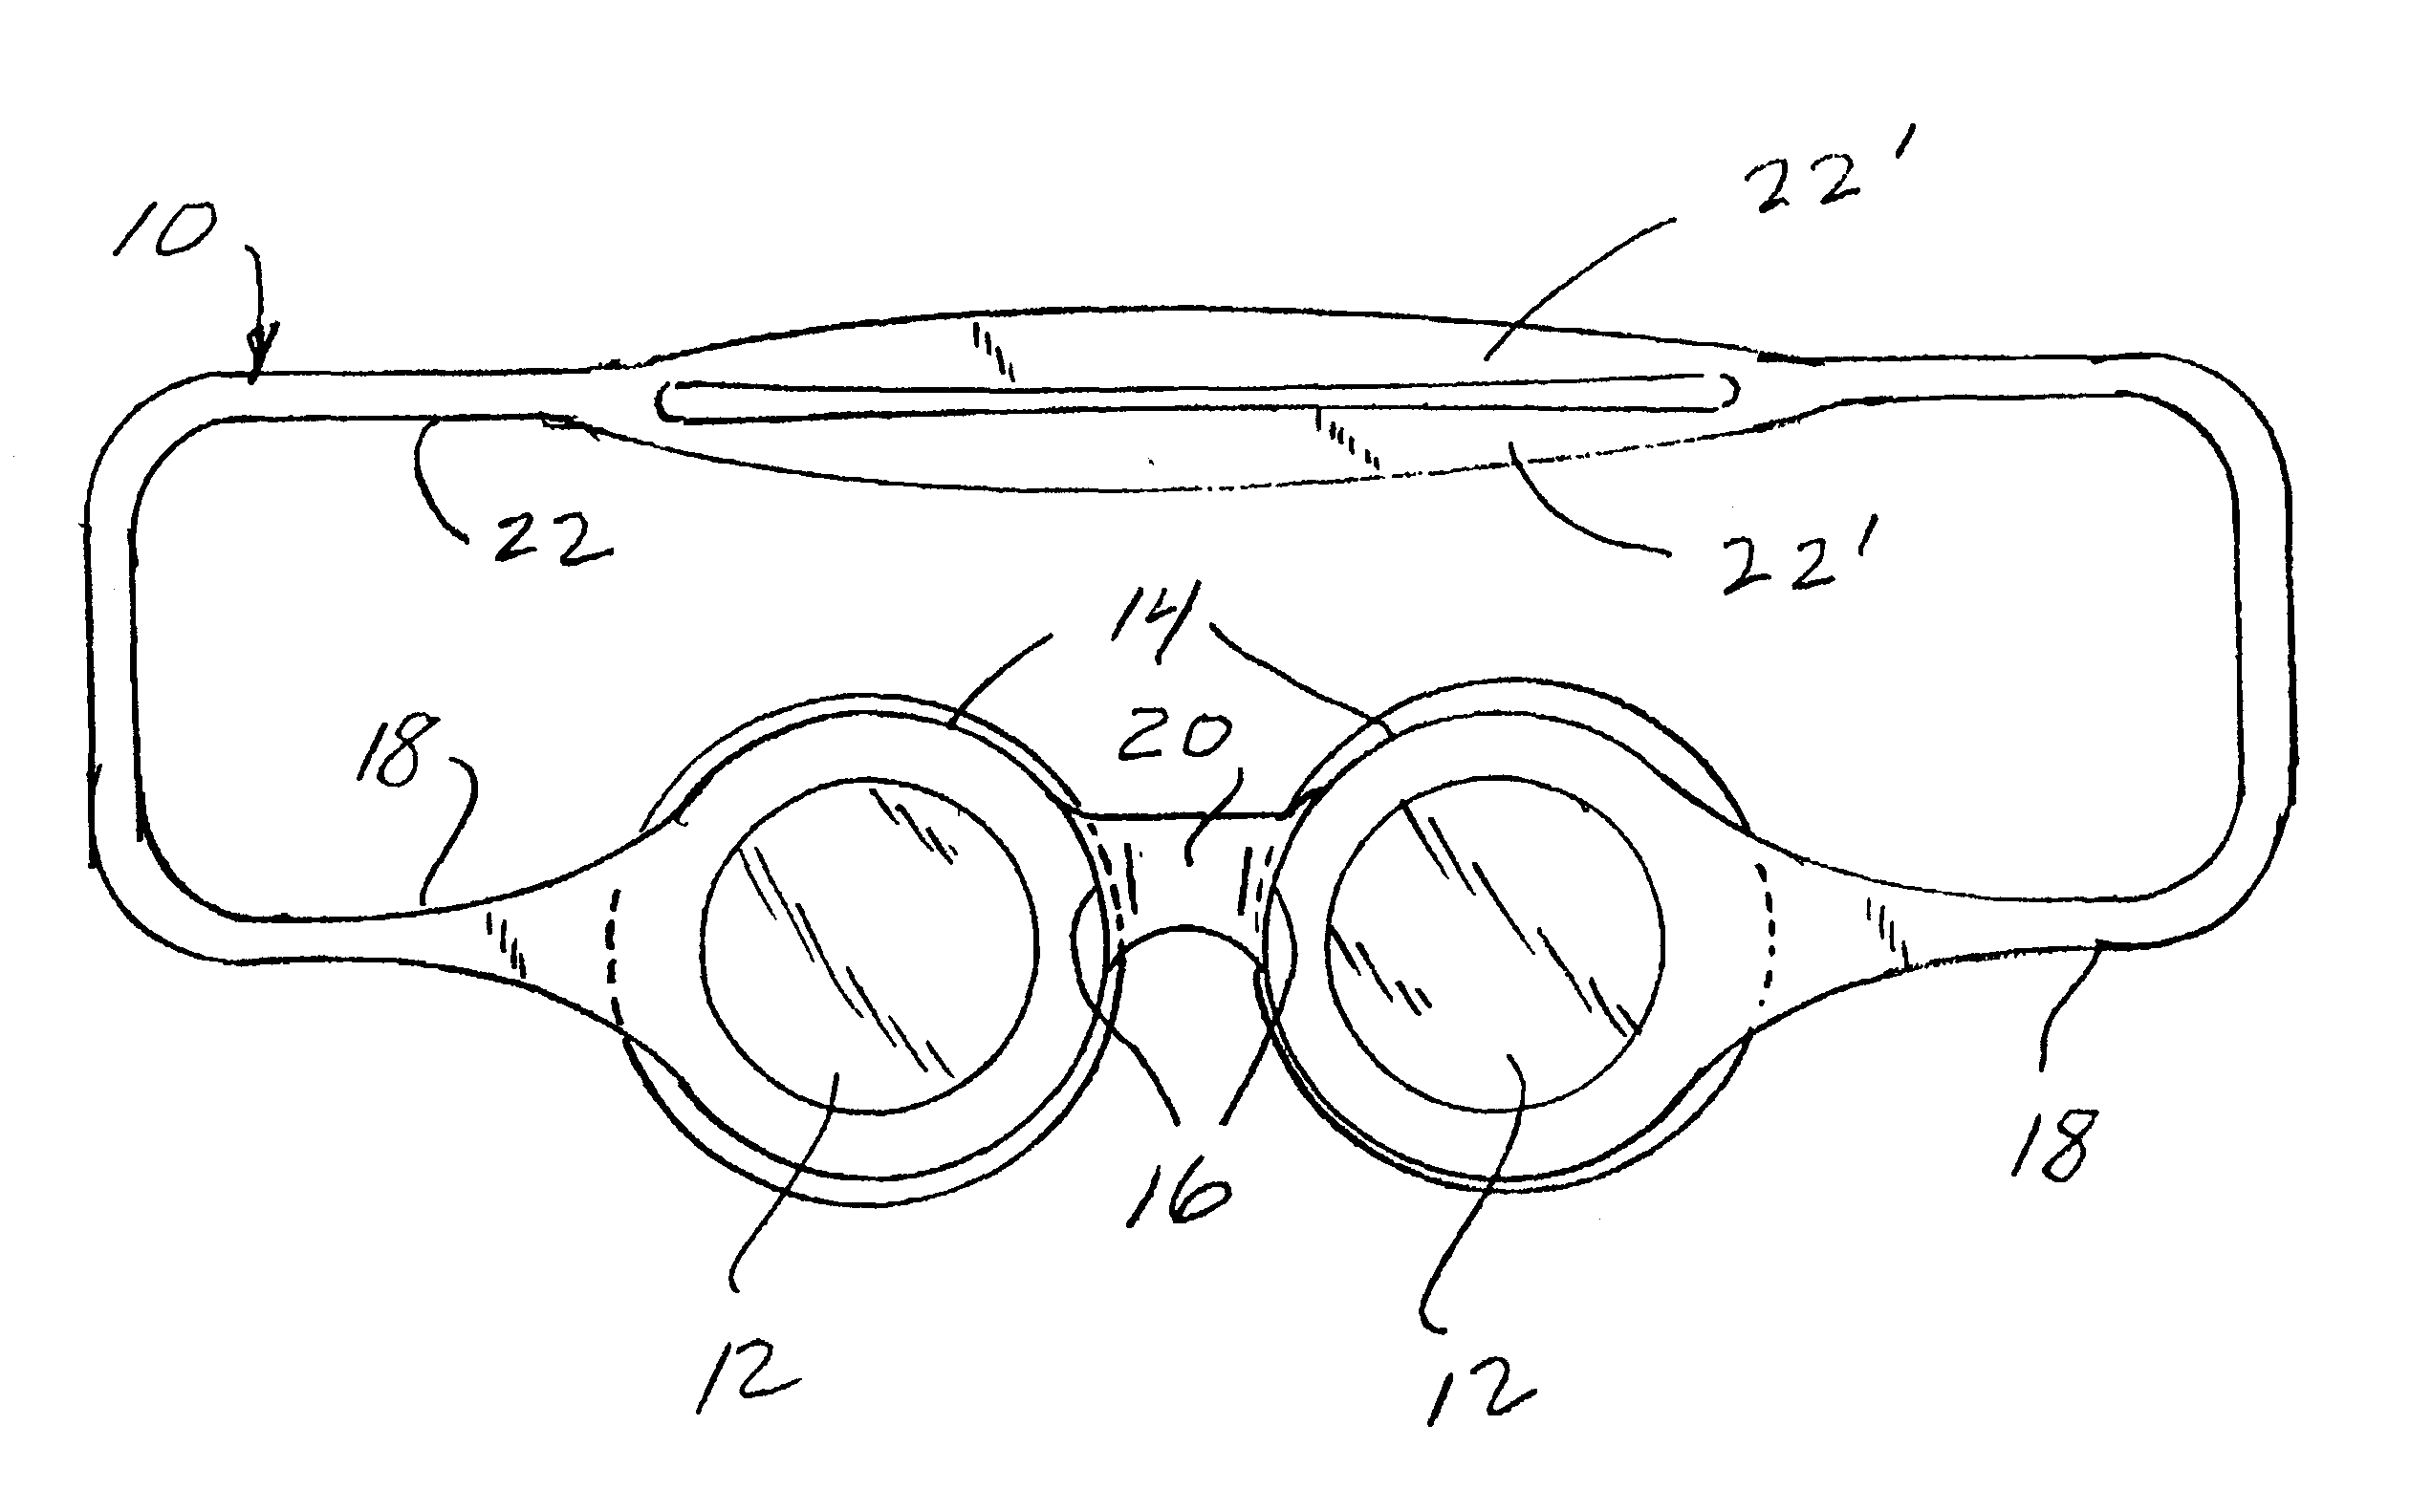 One-piece integrally-formed goggle